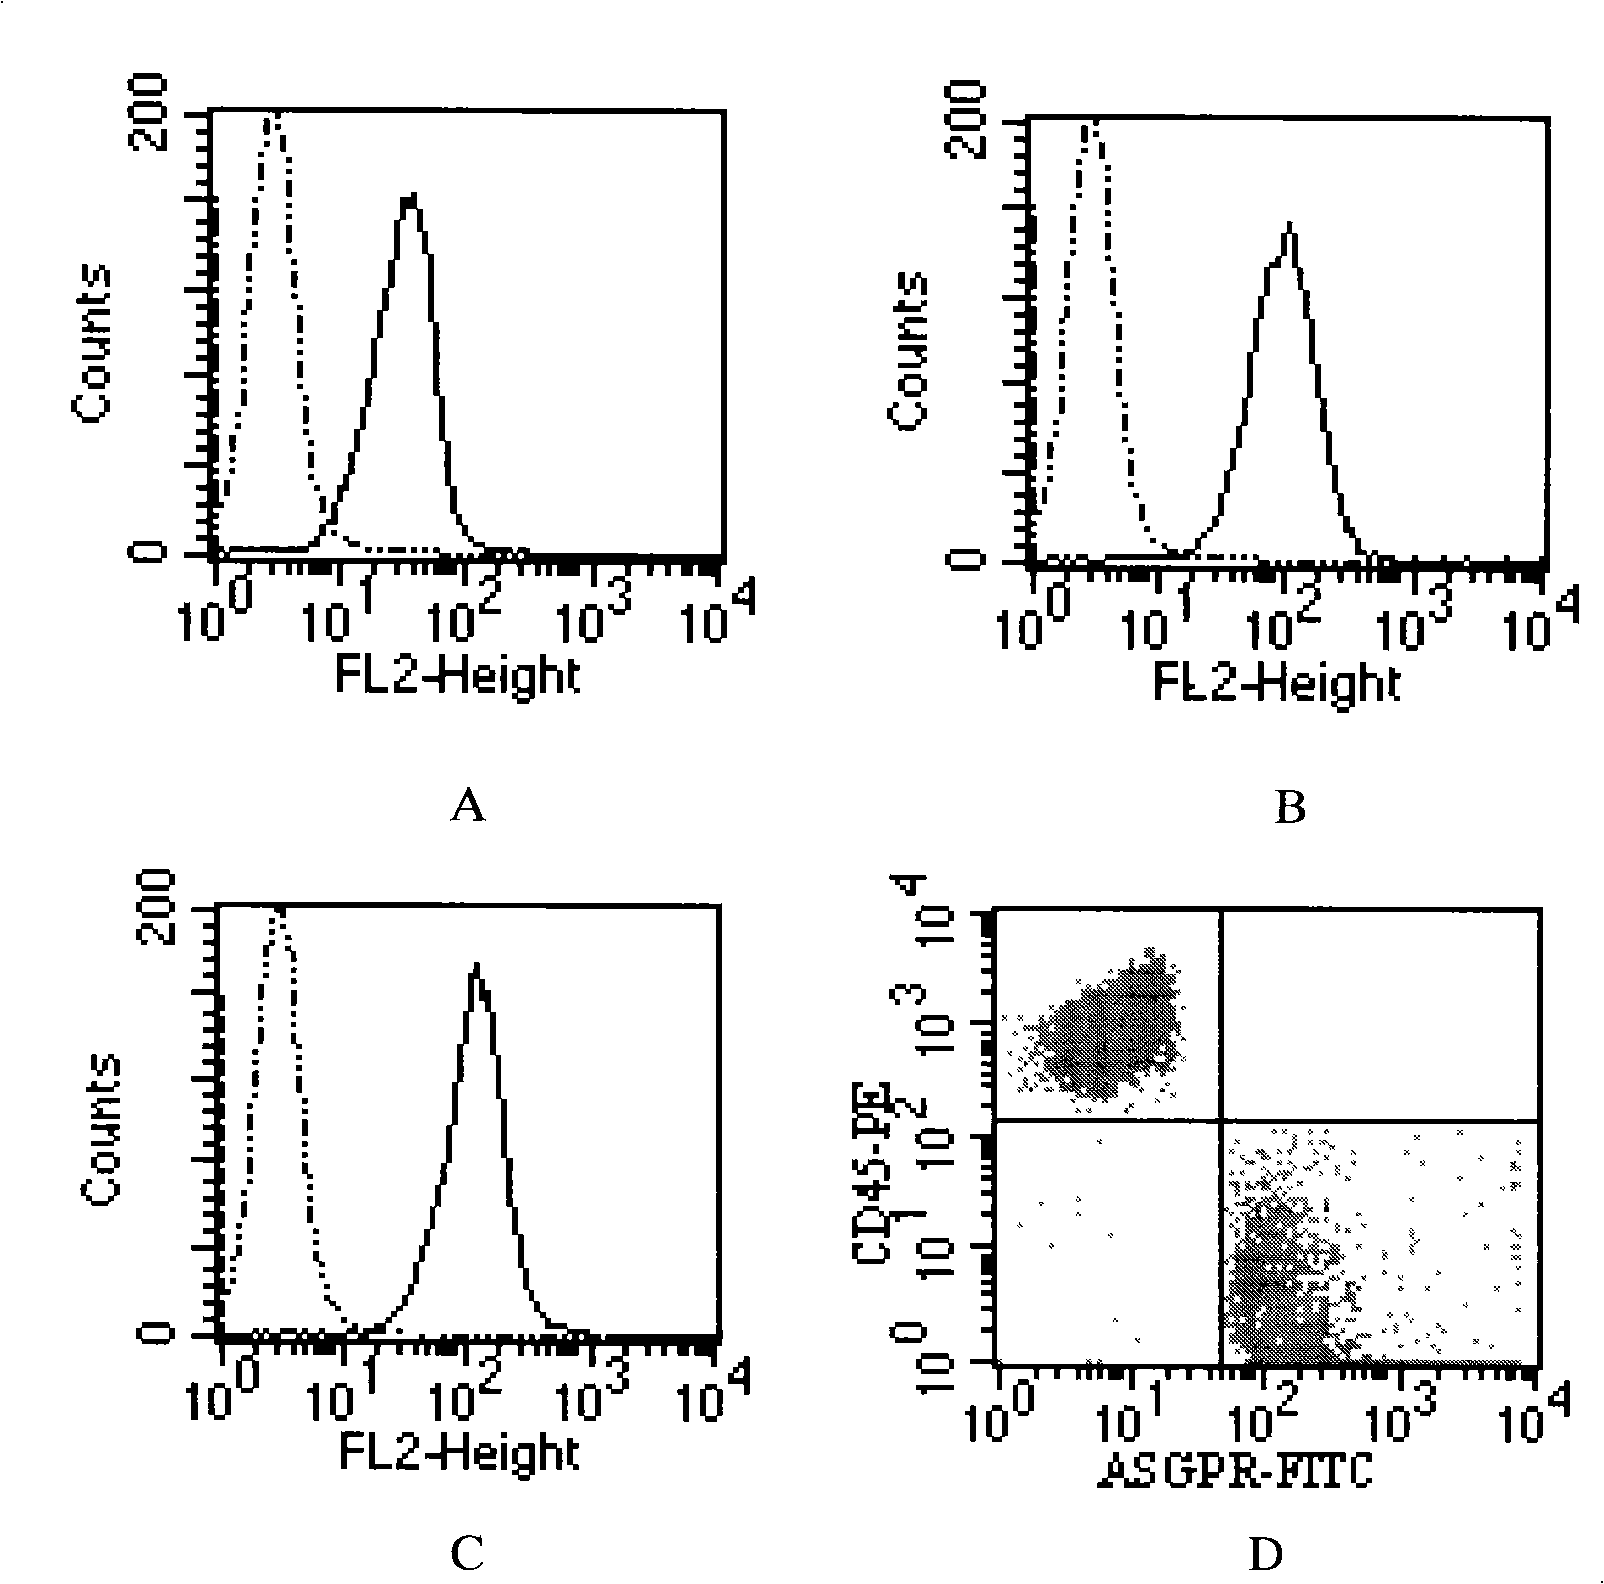 Method for separating and identifying disseminated hepatoma cells